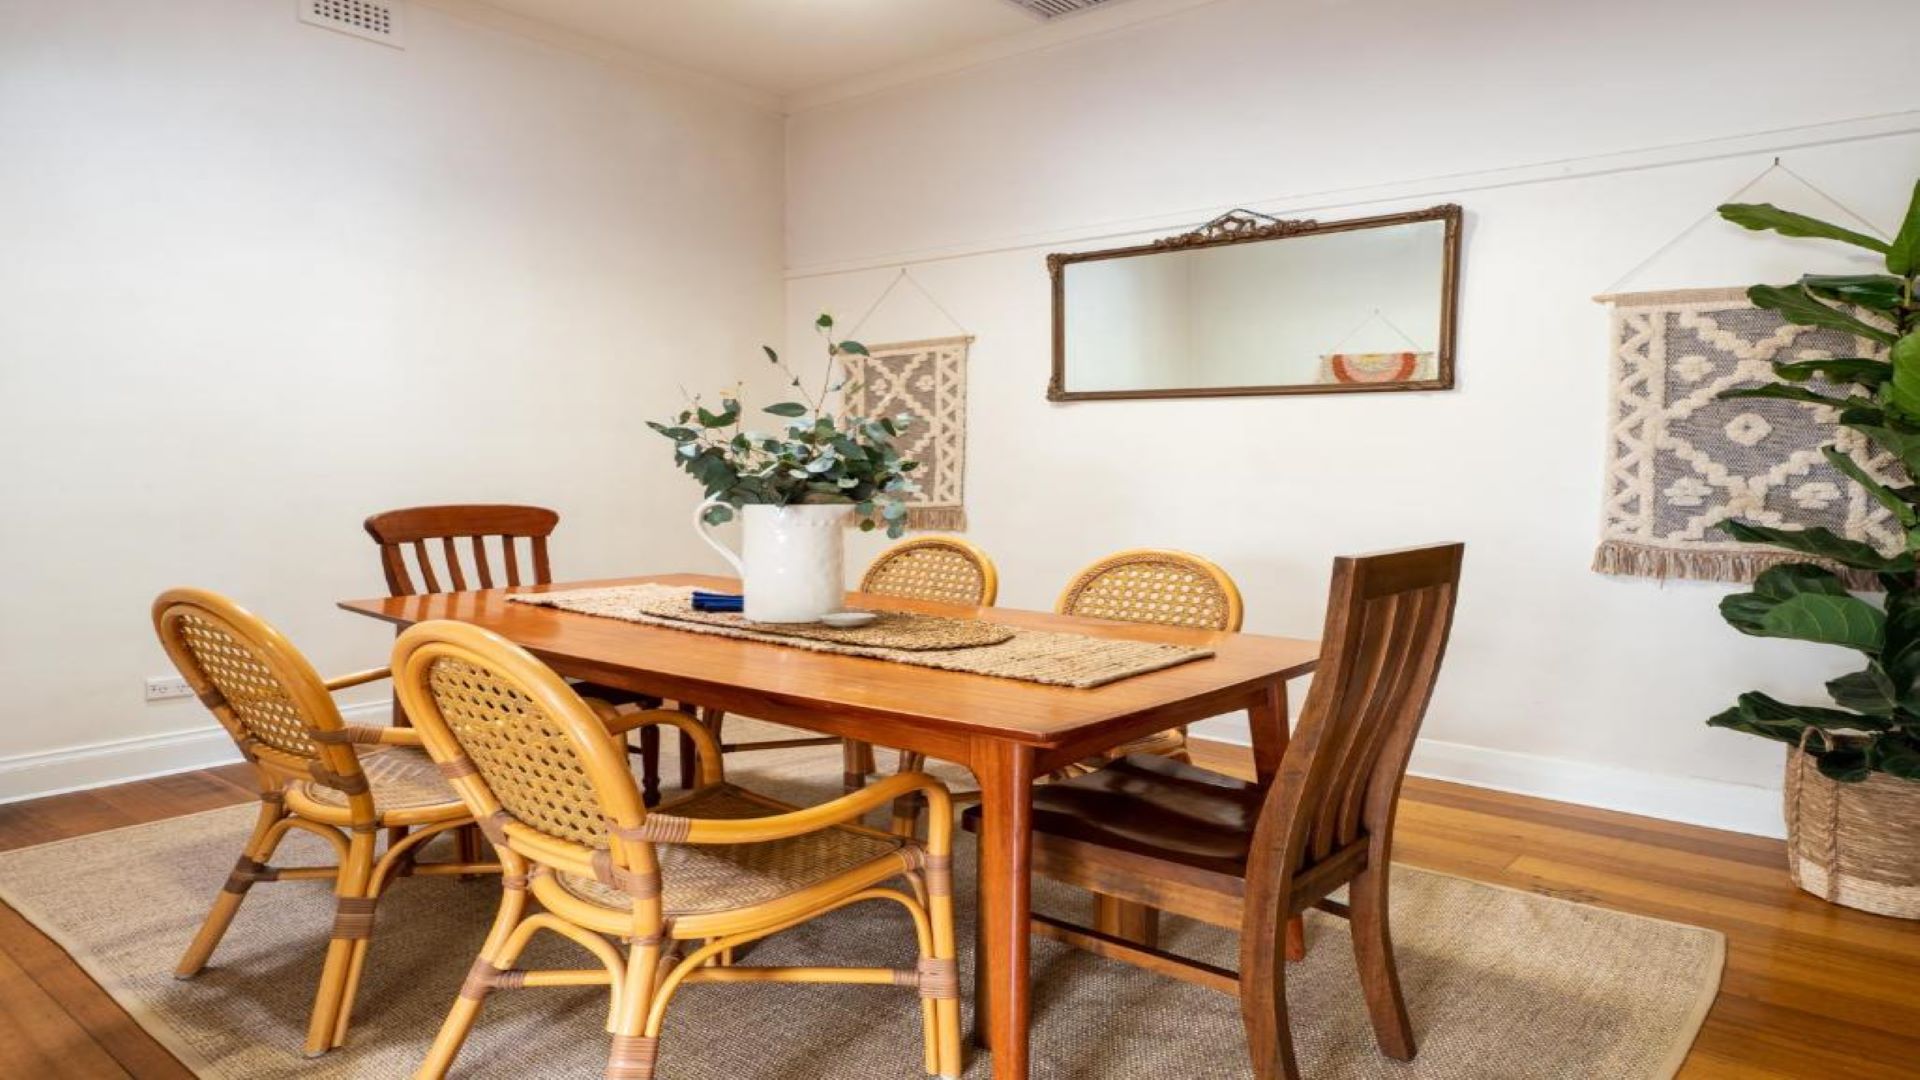 Image is of a dining room with a wooden table and chairs